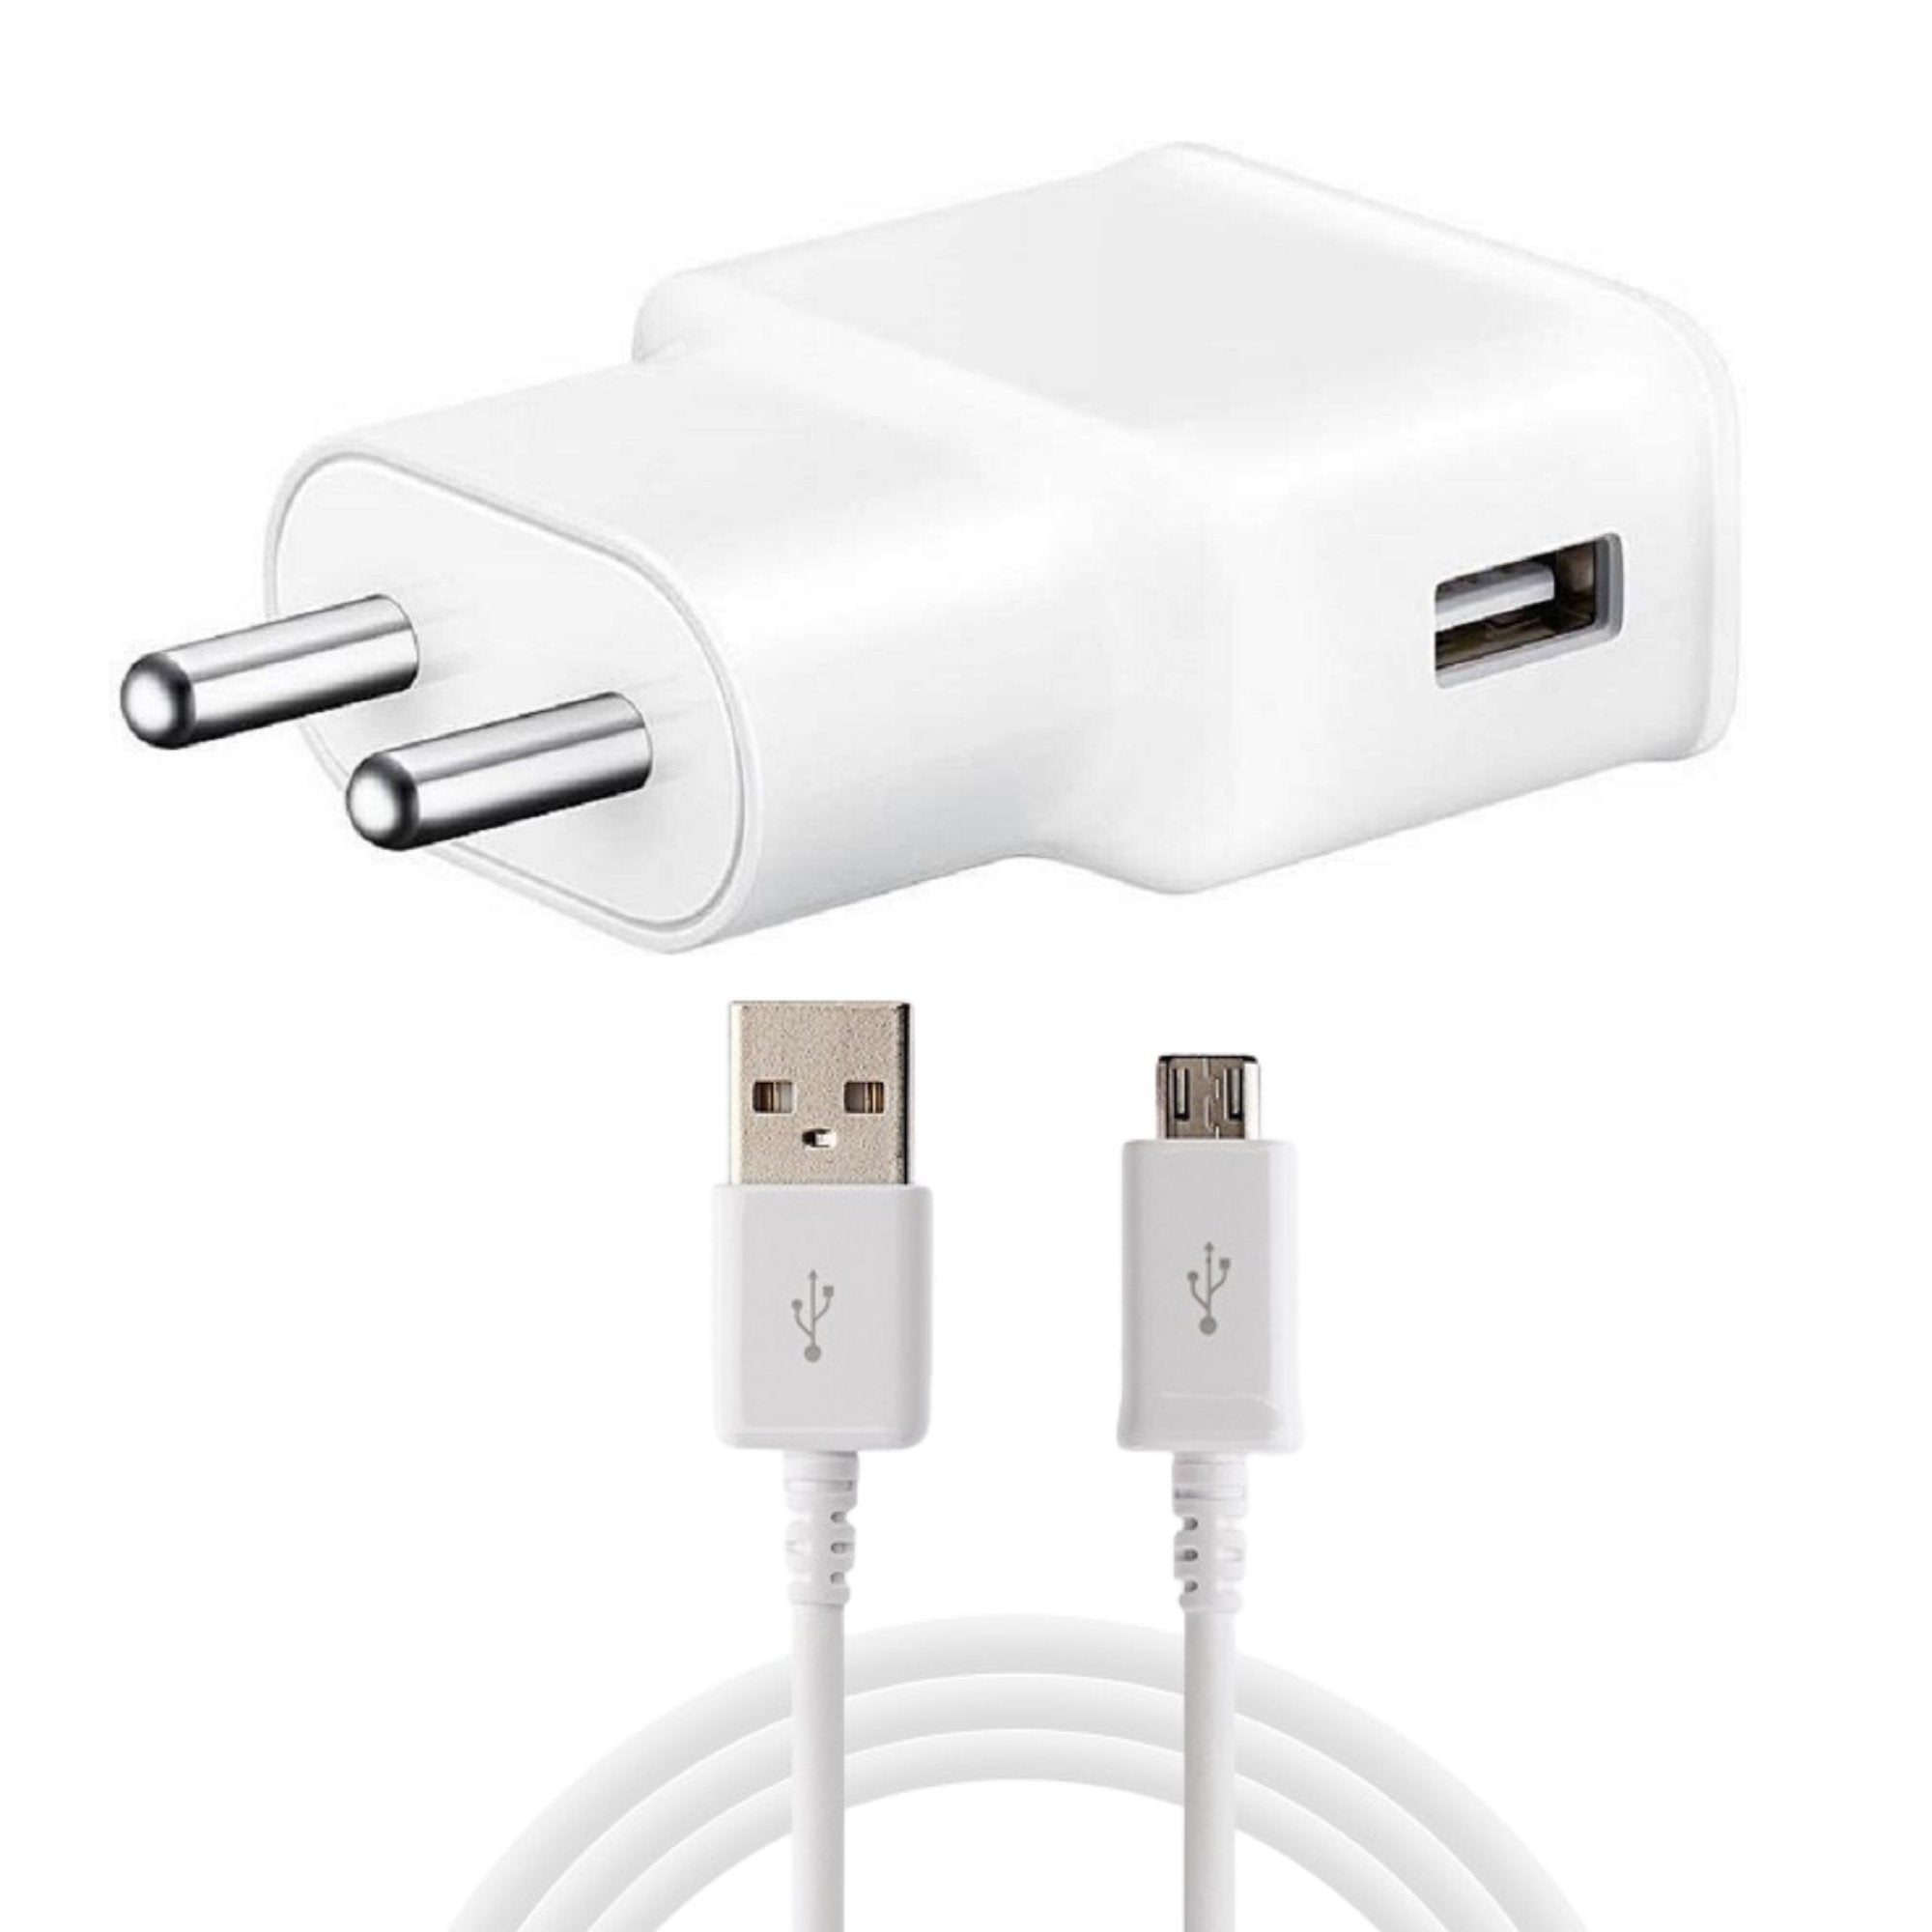 Samsung A20e Adaptive Mobile Charger 2 Amp With Adaptive Fast Cable White-chargingcable.in